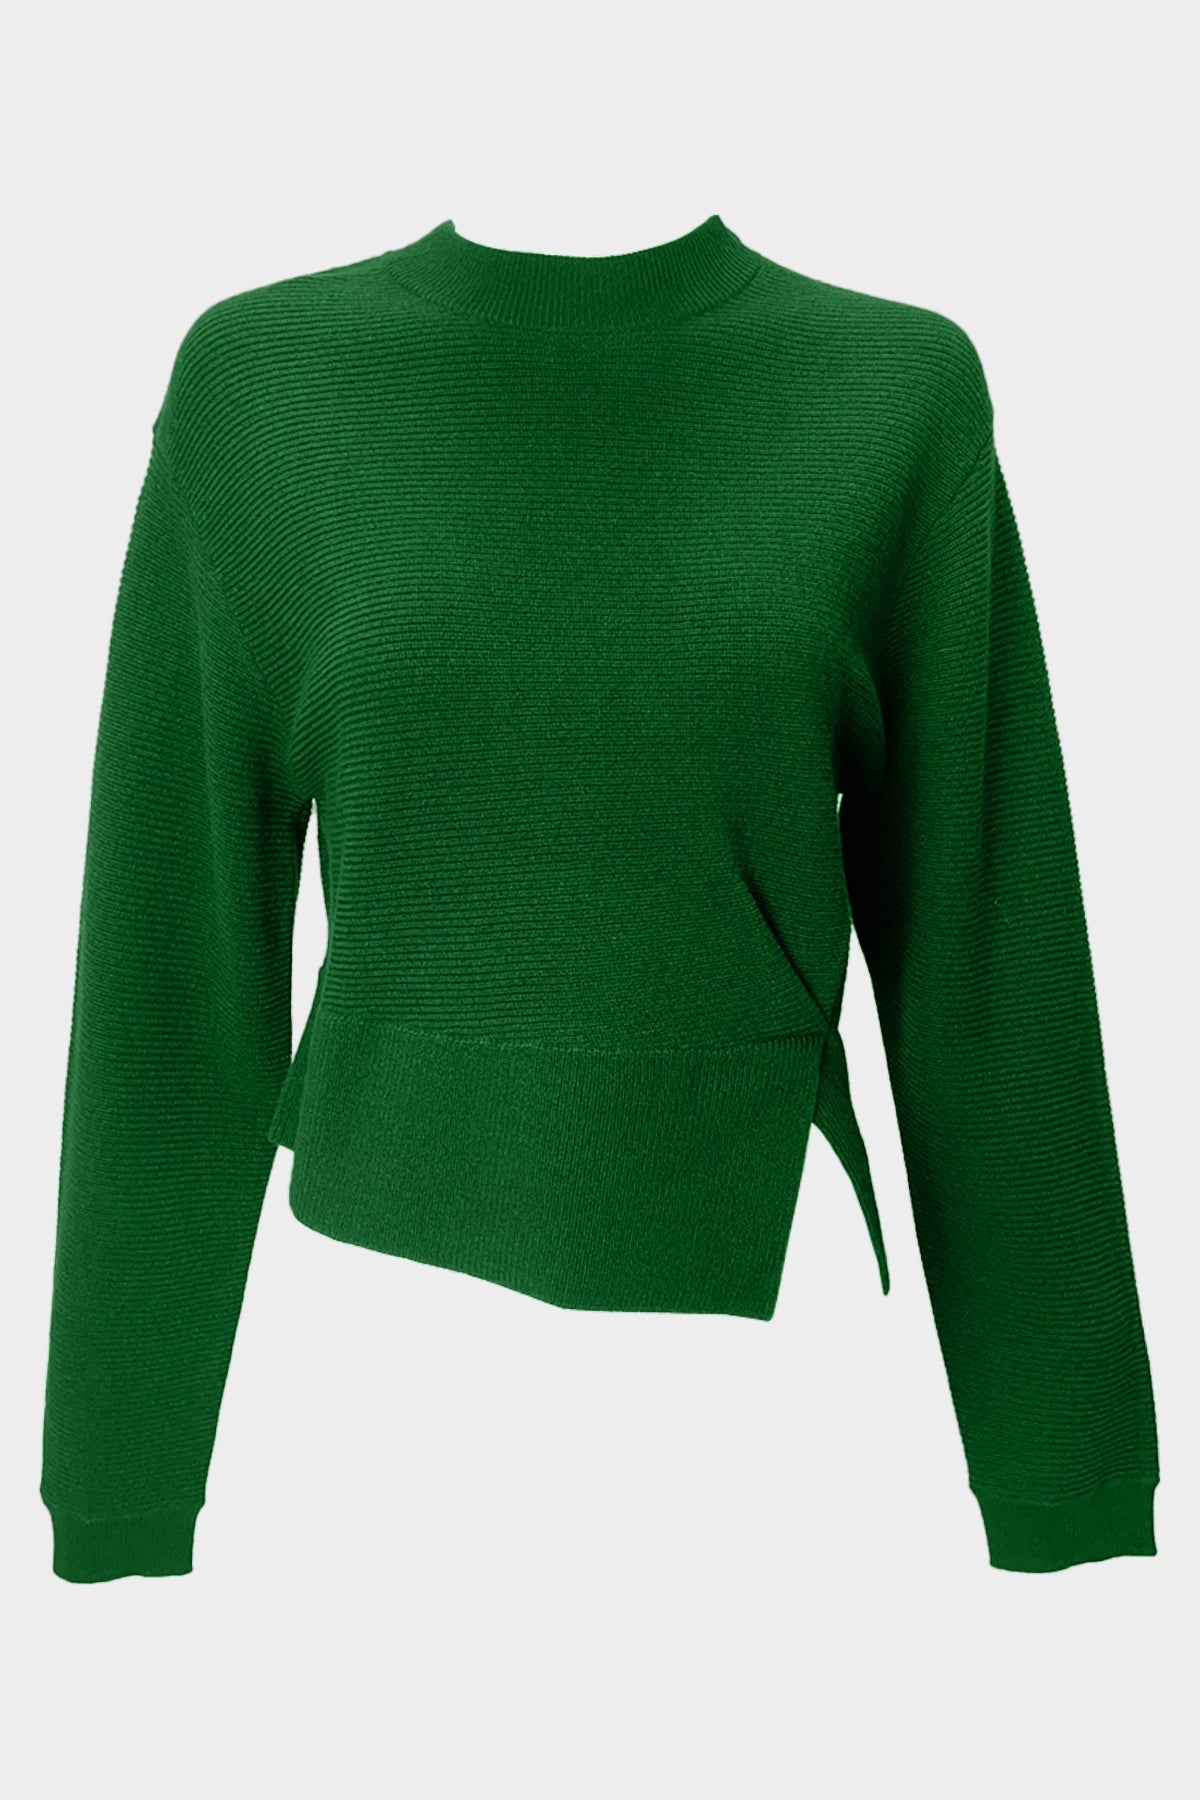 Knot Cashmere Knit Sweater in Pine - shop-olivia.com